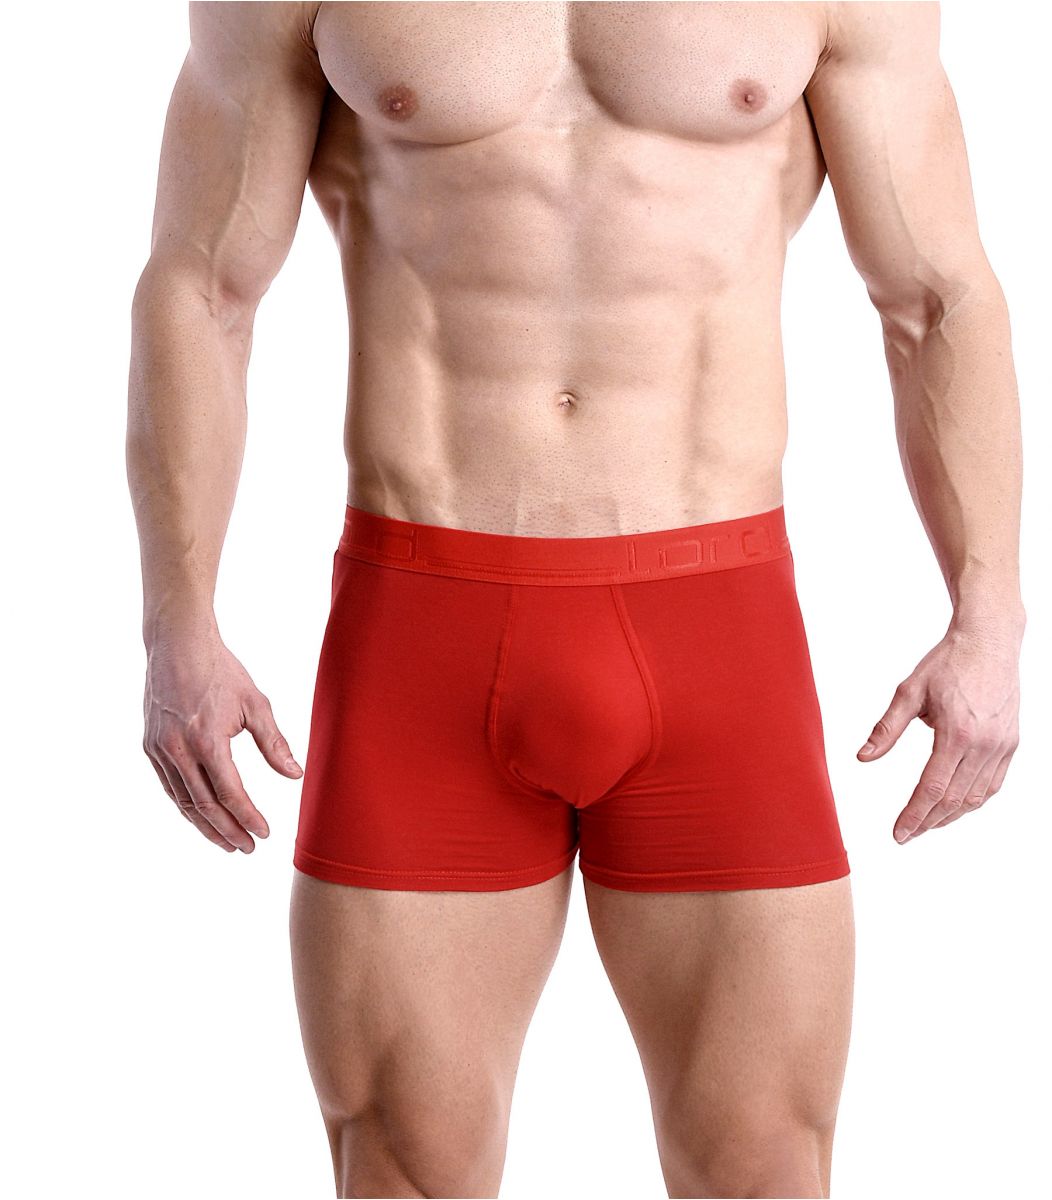  Boxers Lord Lord Men cotton boxers {PRODUCT_REFERENCE}-6